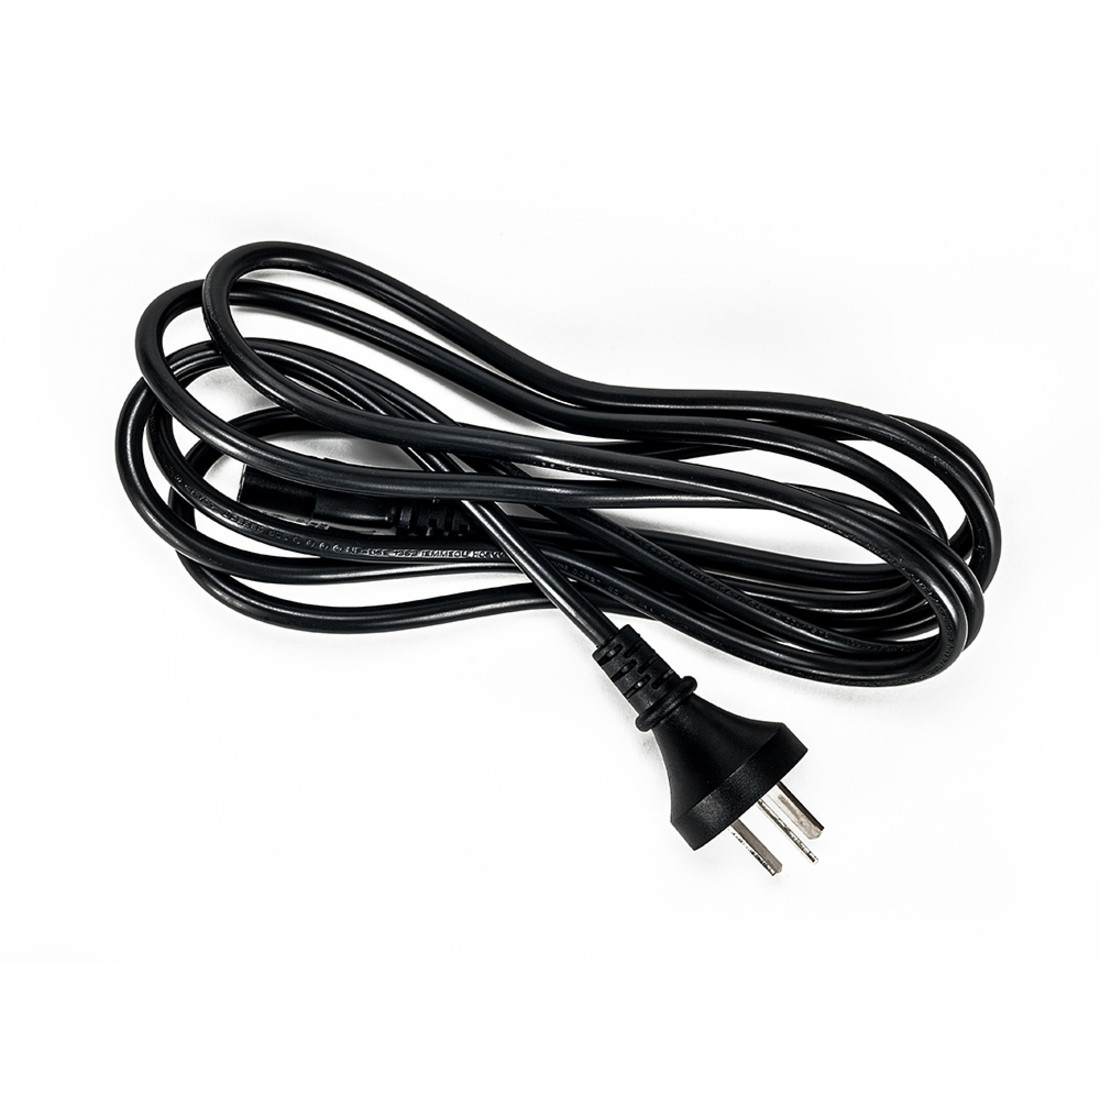 Vertiv Avocent Power Cord for ChinaPower Cord for China (legacy -103 skus) CAB0307